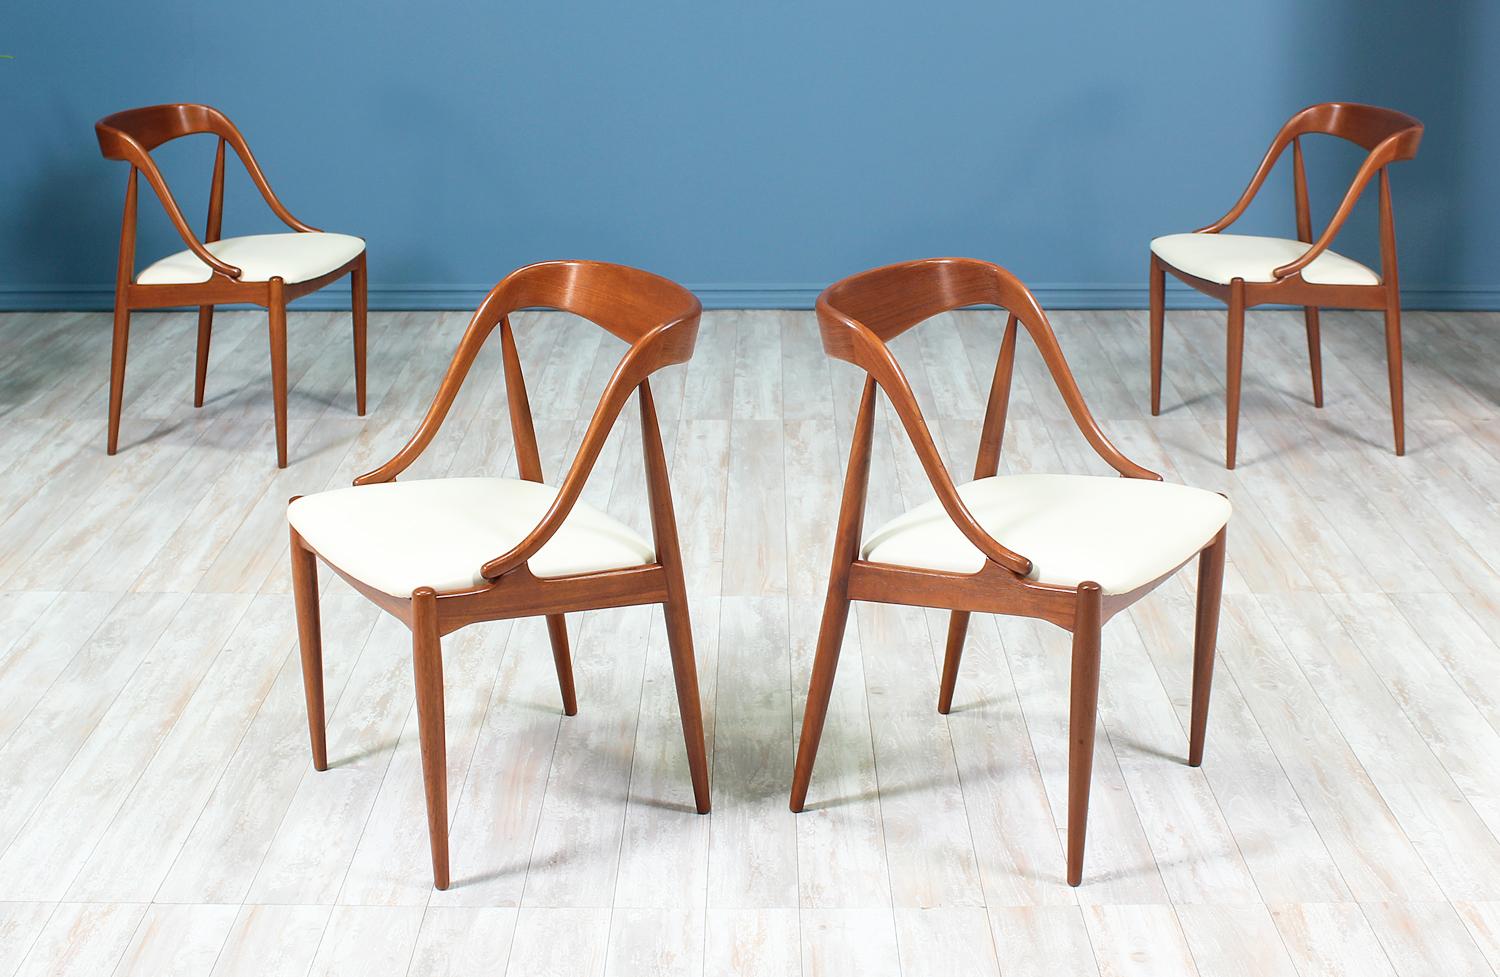 Designer: Johannes Andersen
Manufacturer: Moreddi
Country of origin: Denmark
Date of manufacture: 1960-1969
Materials: Teak wood, new top-grain leather
Period style: Danish modern.

Condition: Excellent
Extra conditions: Newly refinished and